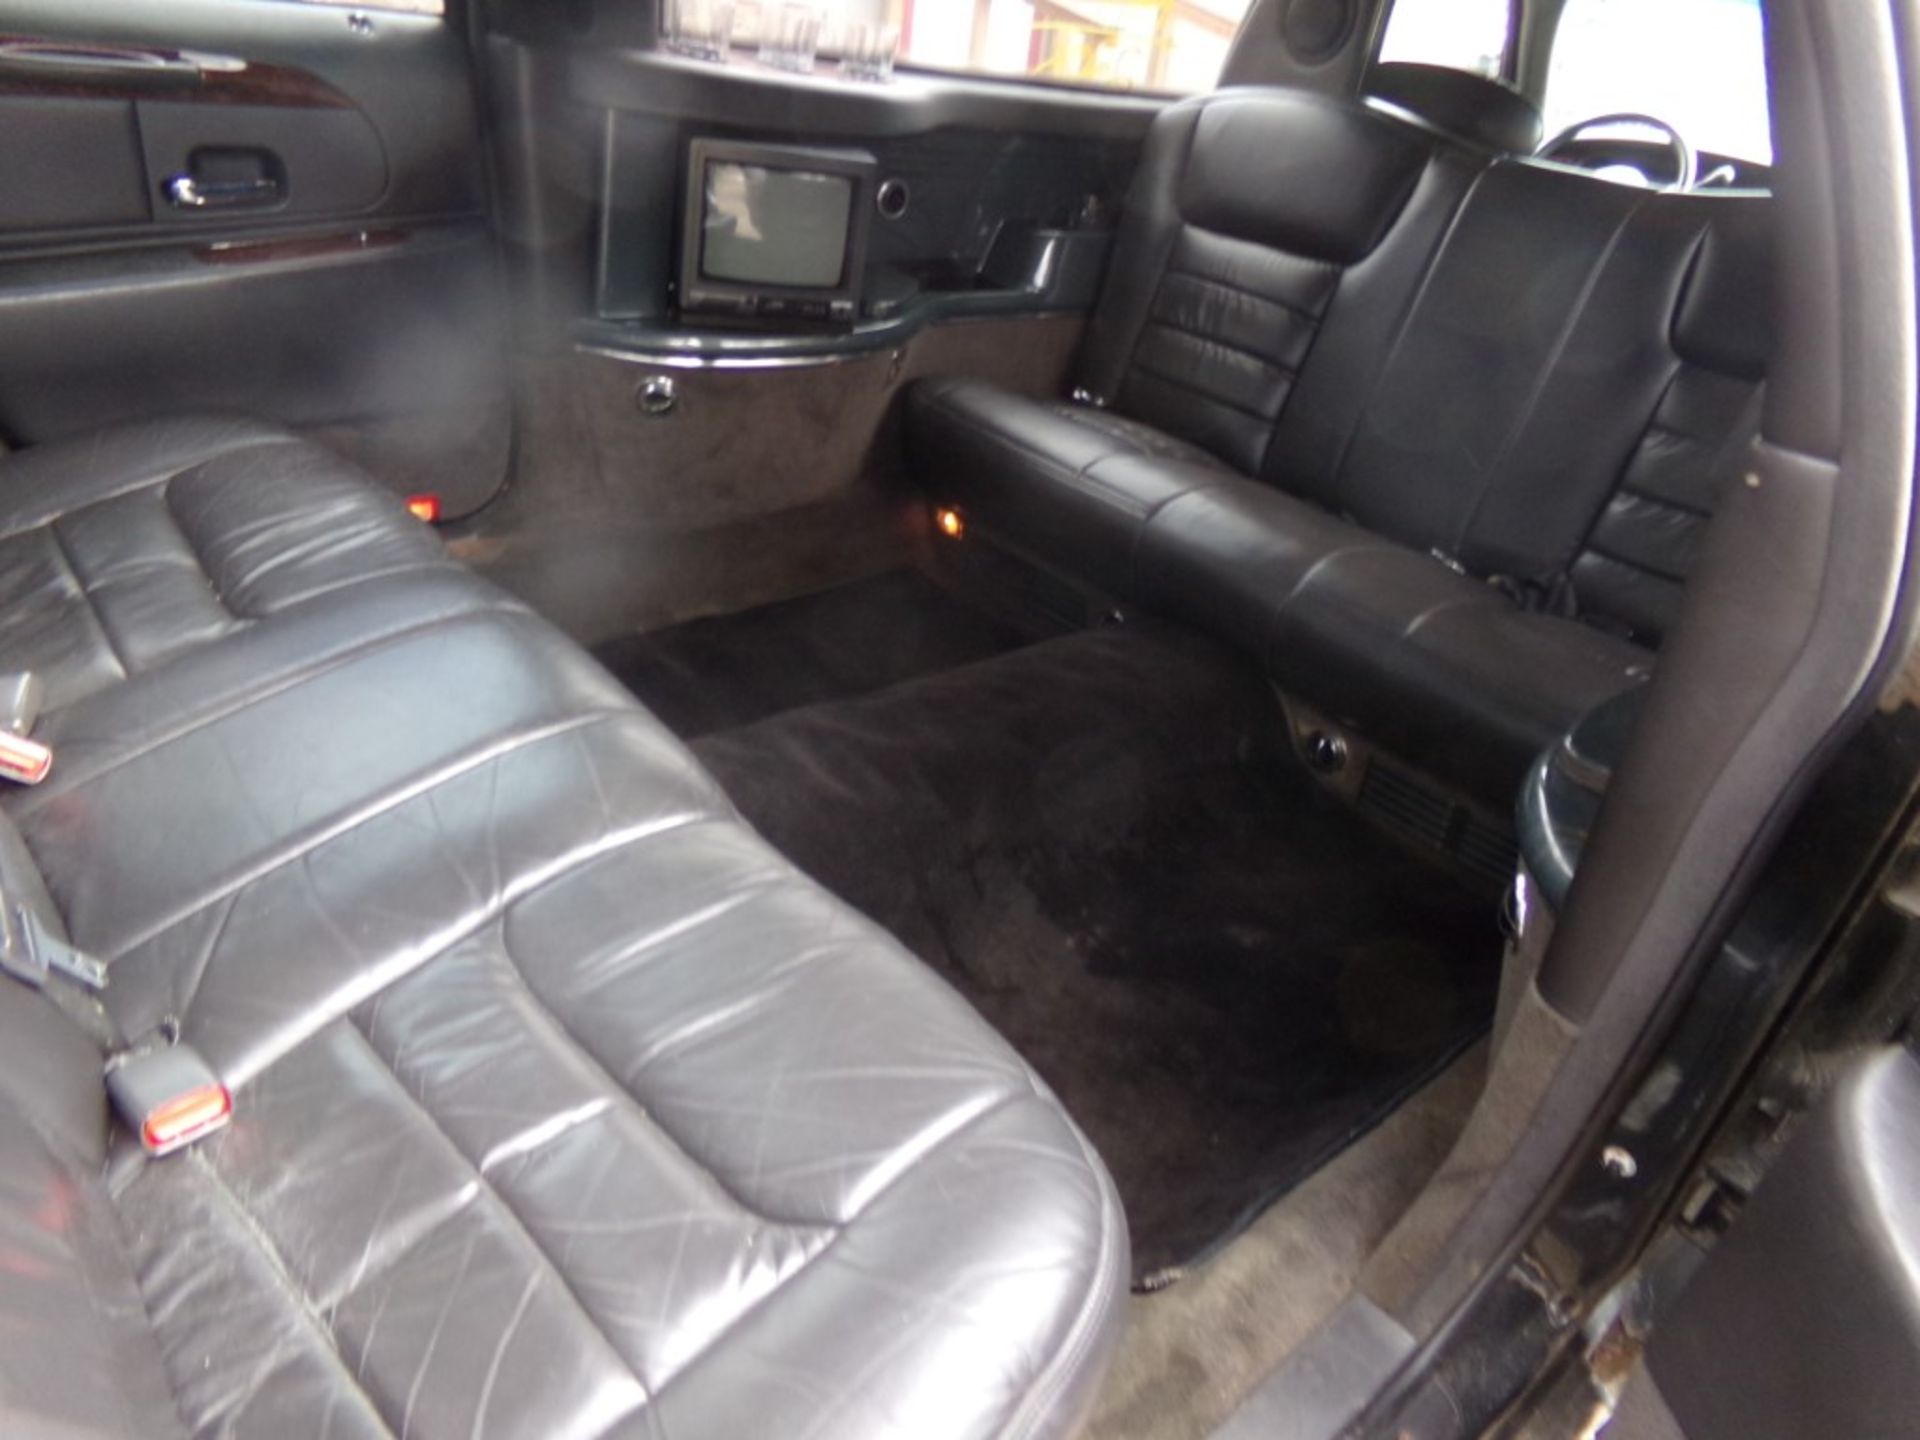 1999 Lincoln Town Car Executive (Limo), Leather, This Vehicle is a Limosine, Black, 220,606 Miles, - Bild 6 aus 8